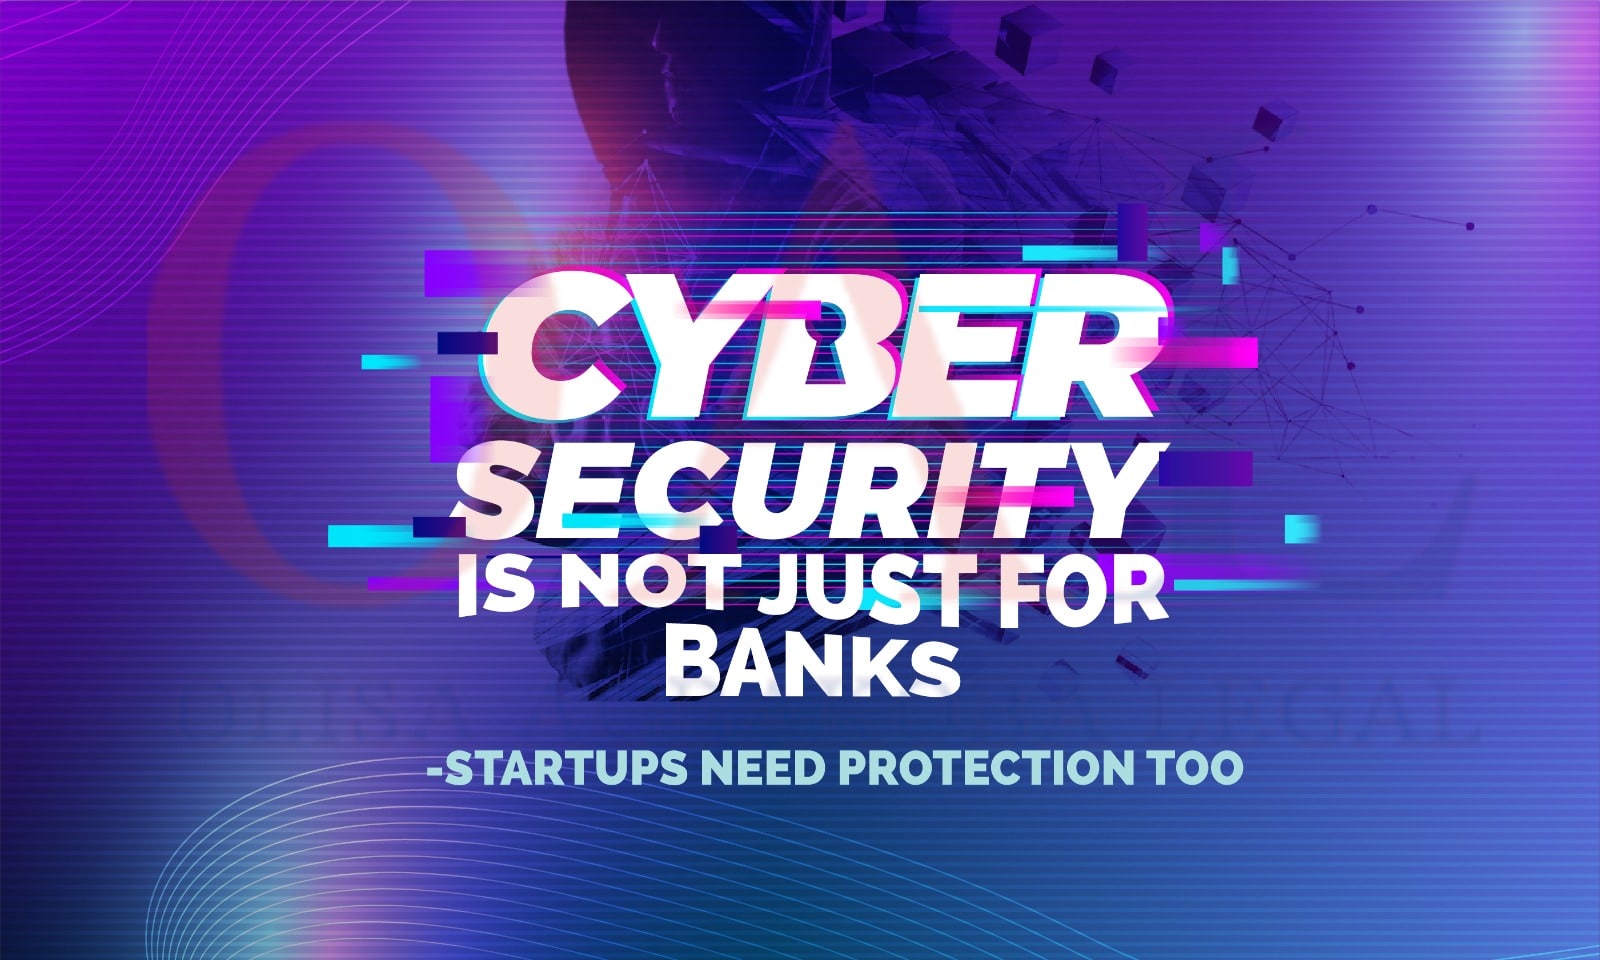 Cyber Security is not just for banks - Startups need protection too by Olisa Agbakoba Legal (OAL)